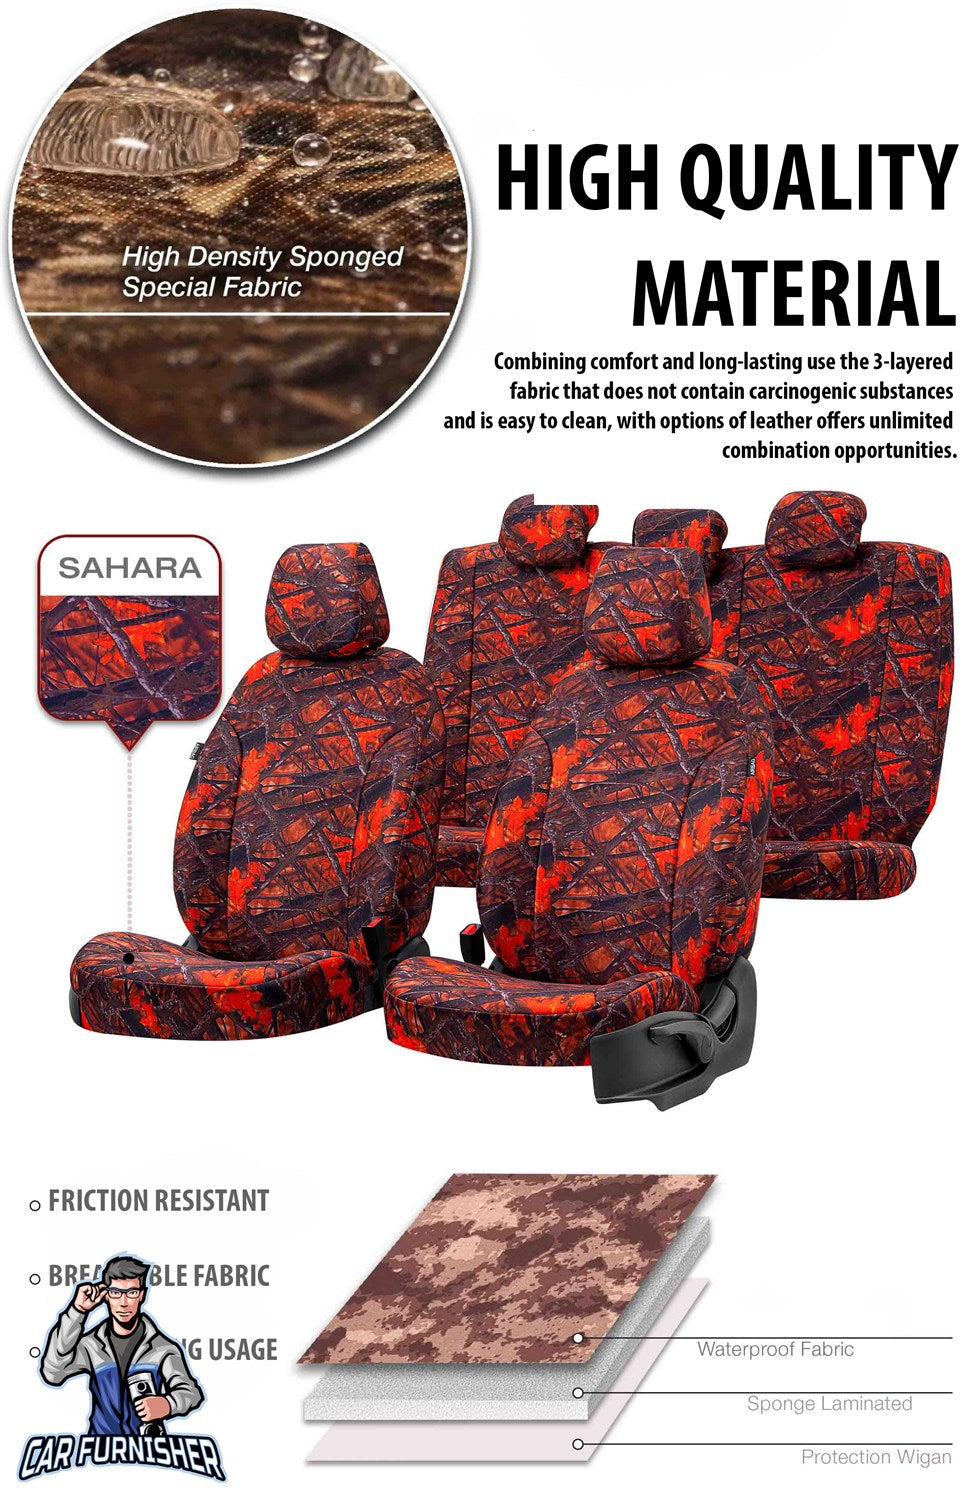 Ford S-Max Seat Covers Camouflage Waterproof Design Sierra Camo Waterproof Fabric